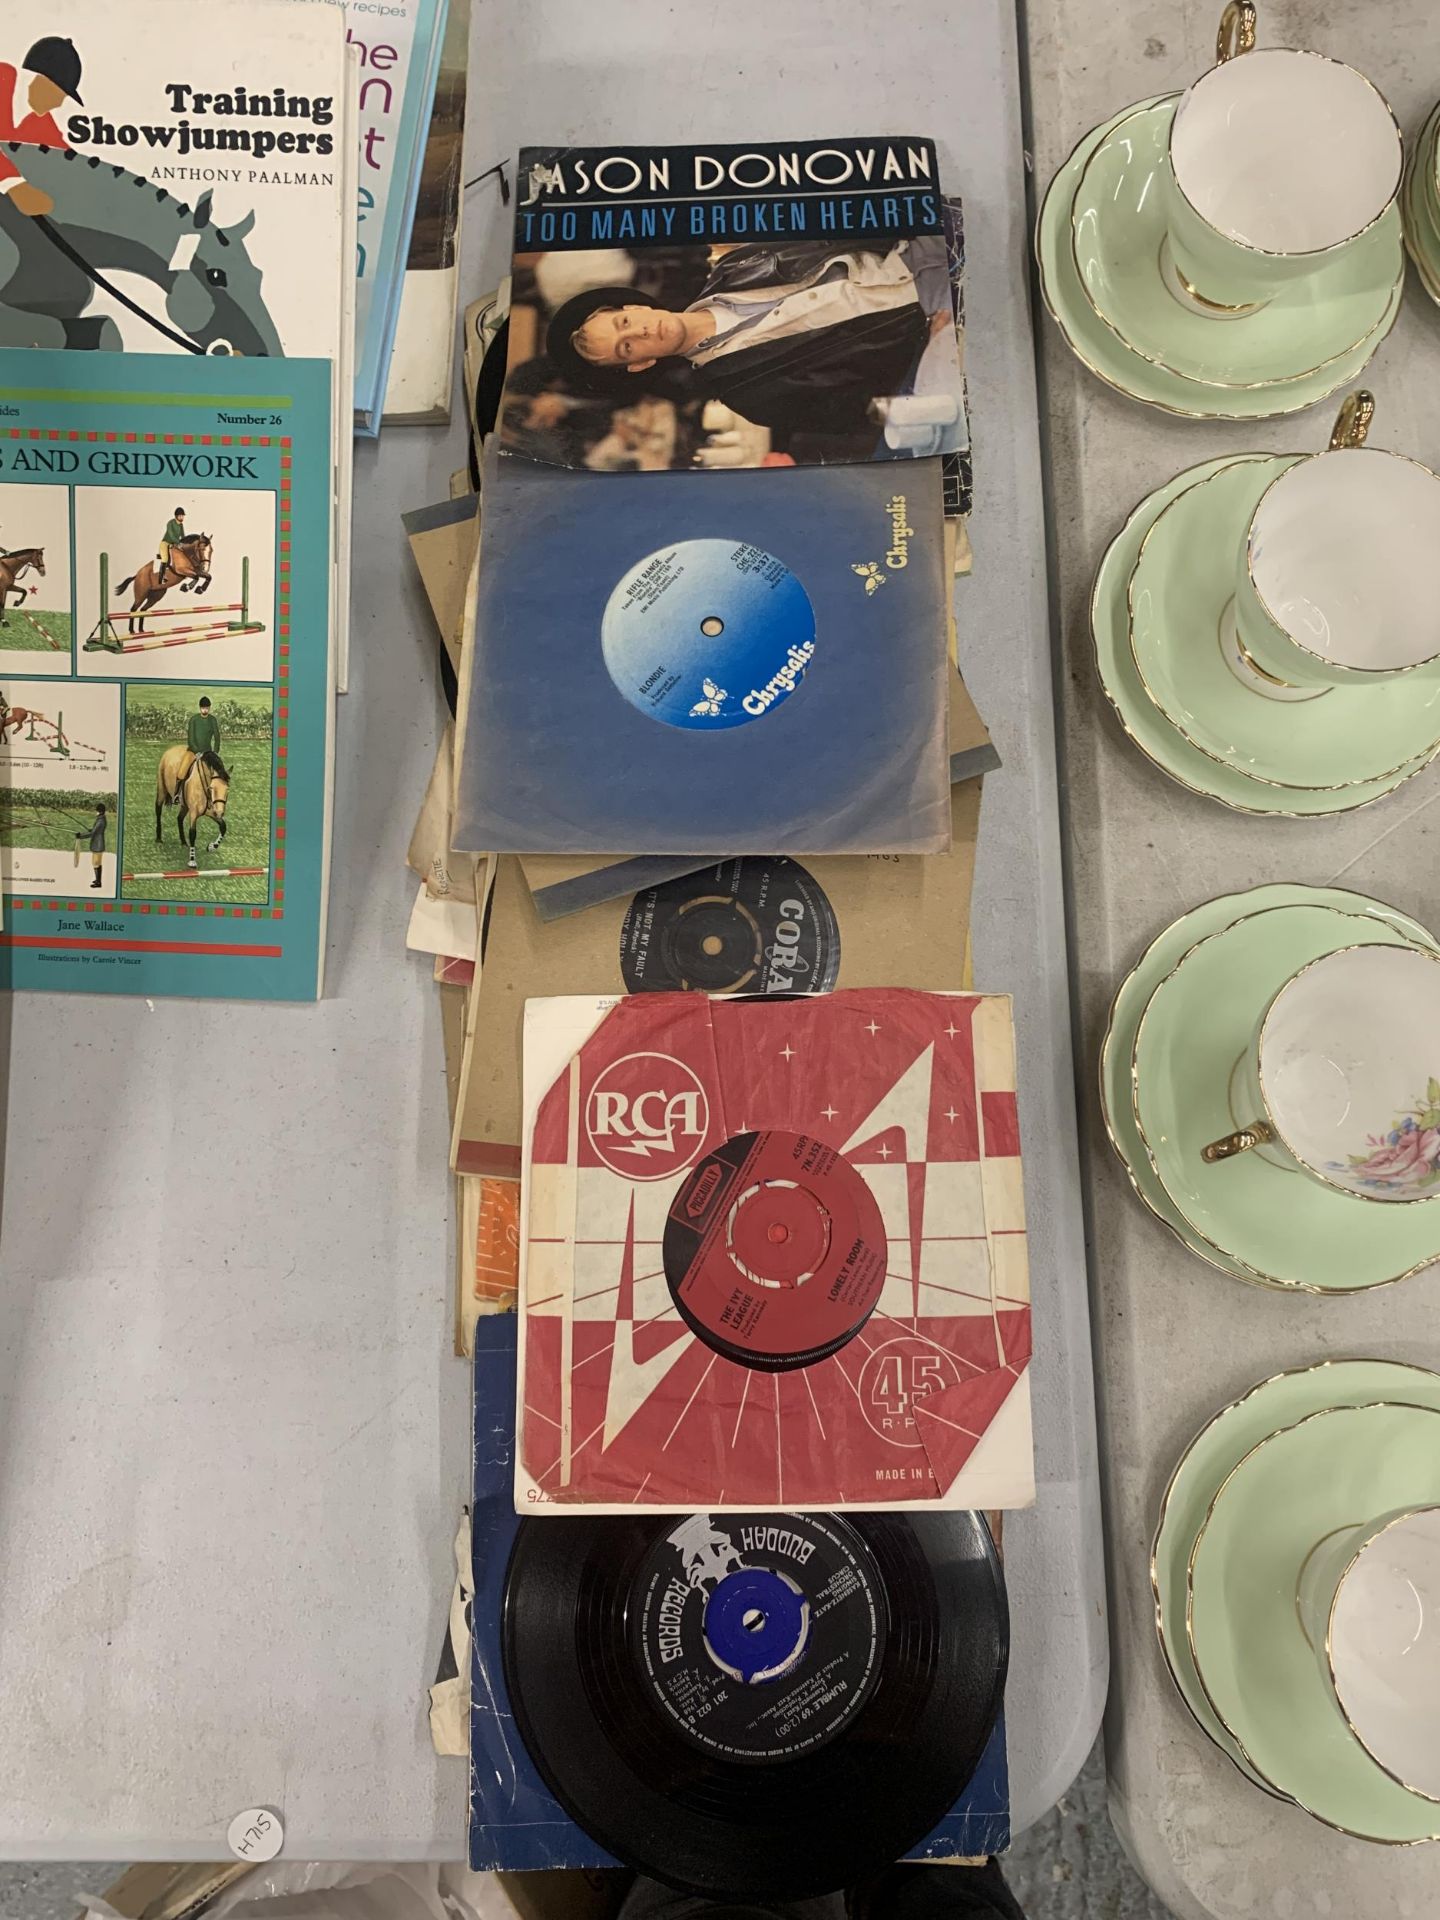 A COLLECTION OF 45RPM RECORDS, JASON DONOVAN ETC - Image 2 of 2